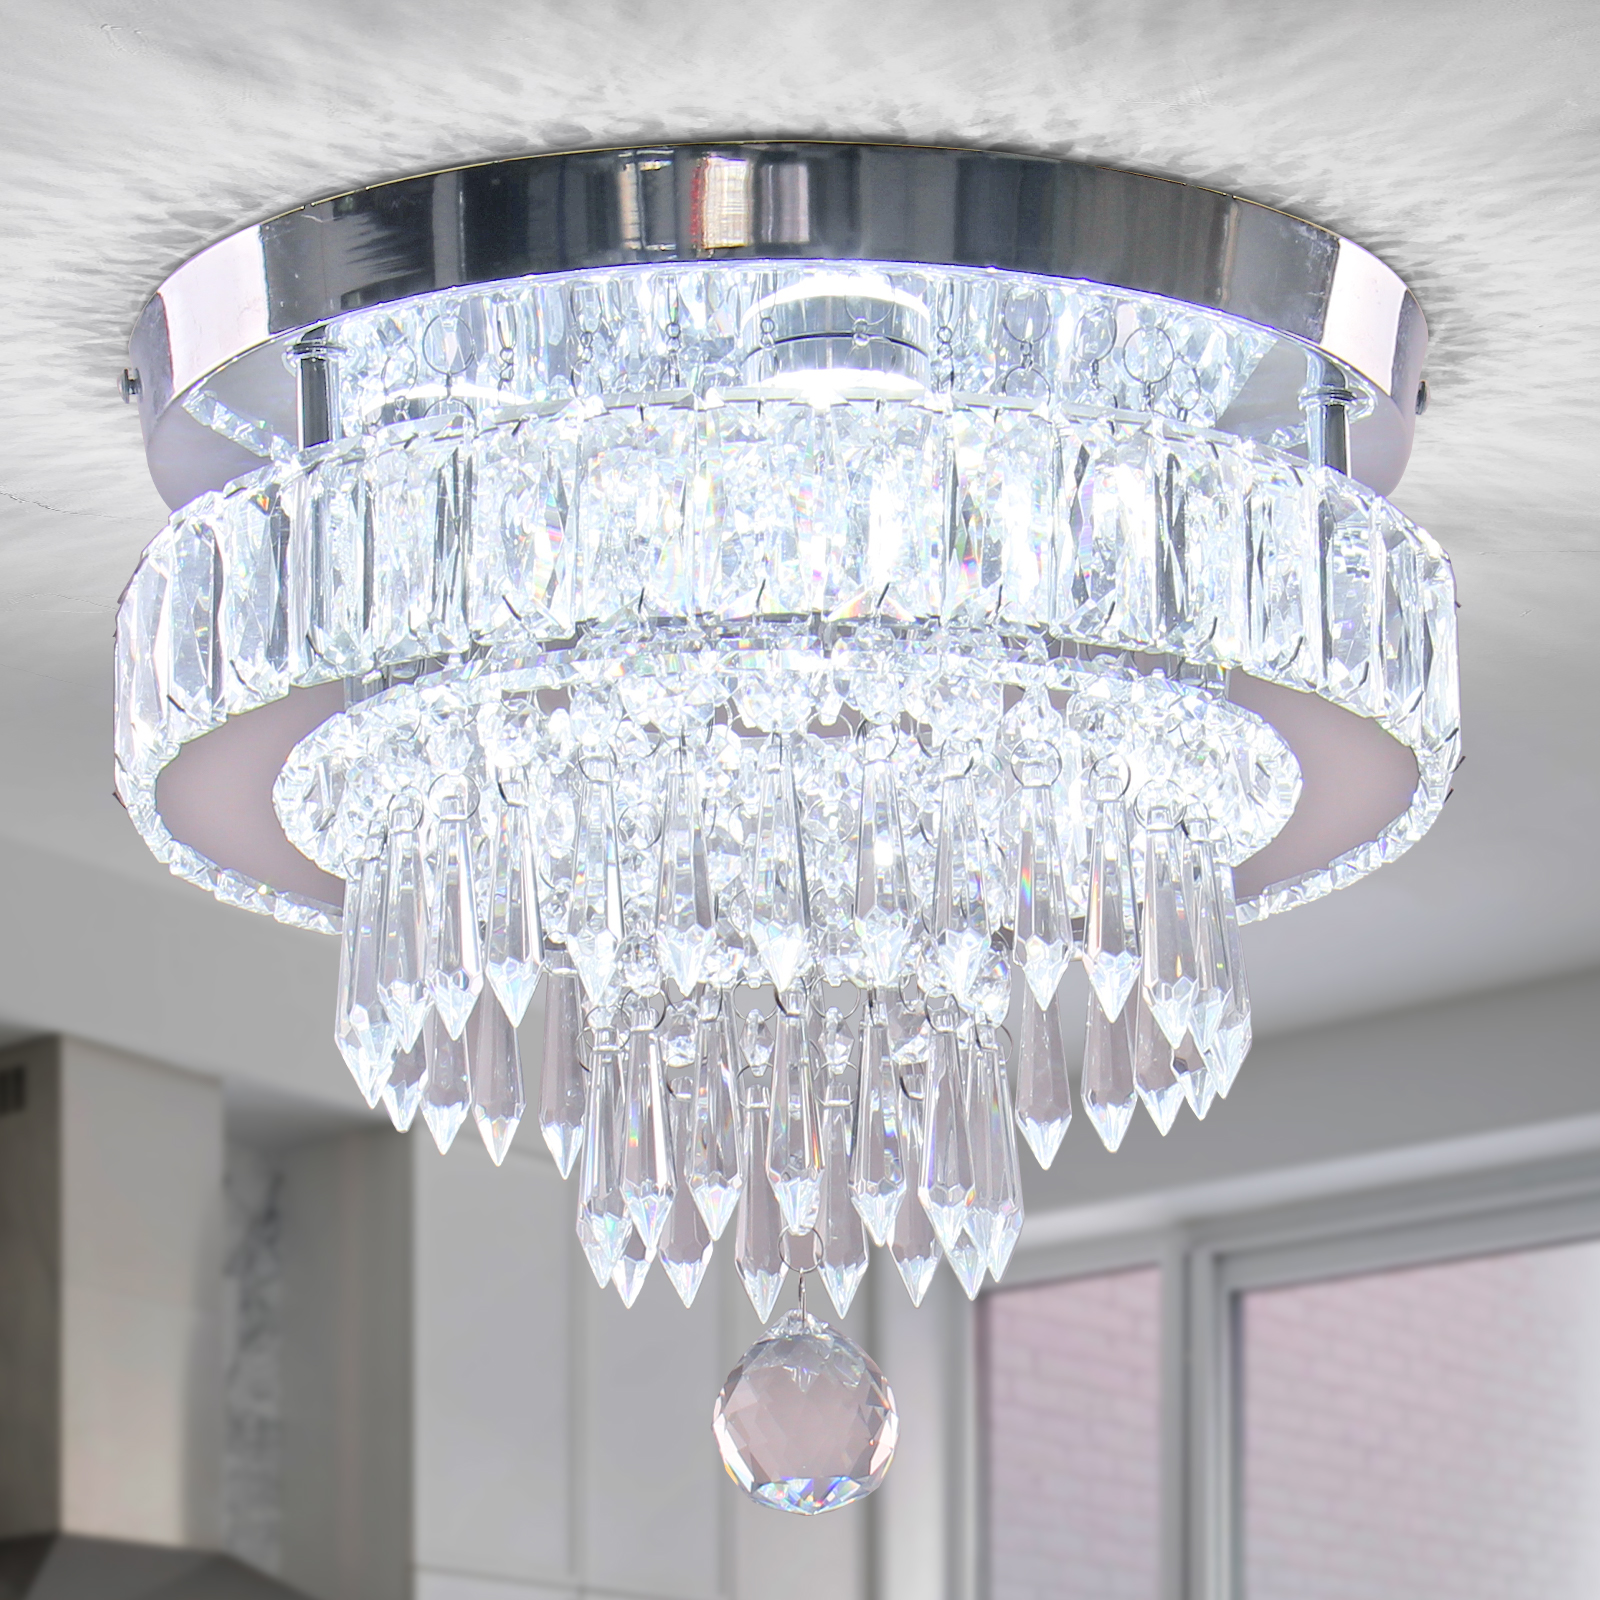 Crystal Chandelier Modern Semi Flush Mount Ceiling Light Fixture LED Chandeliers for Bedrooms Dining Room Entryway Living Room(6500K, Cool White)